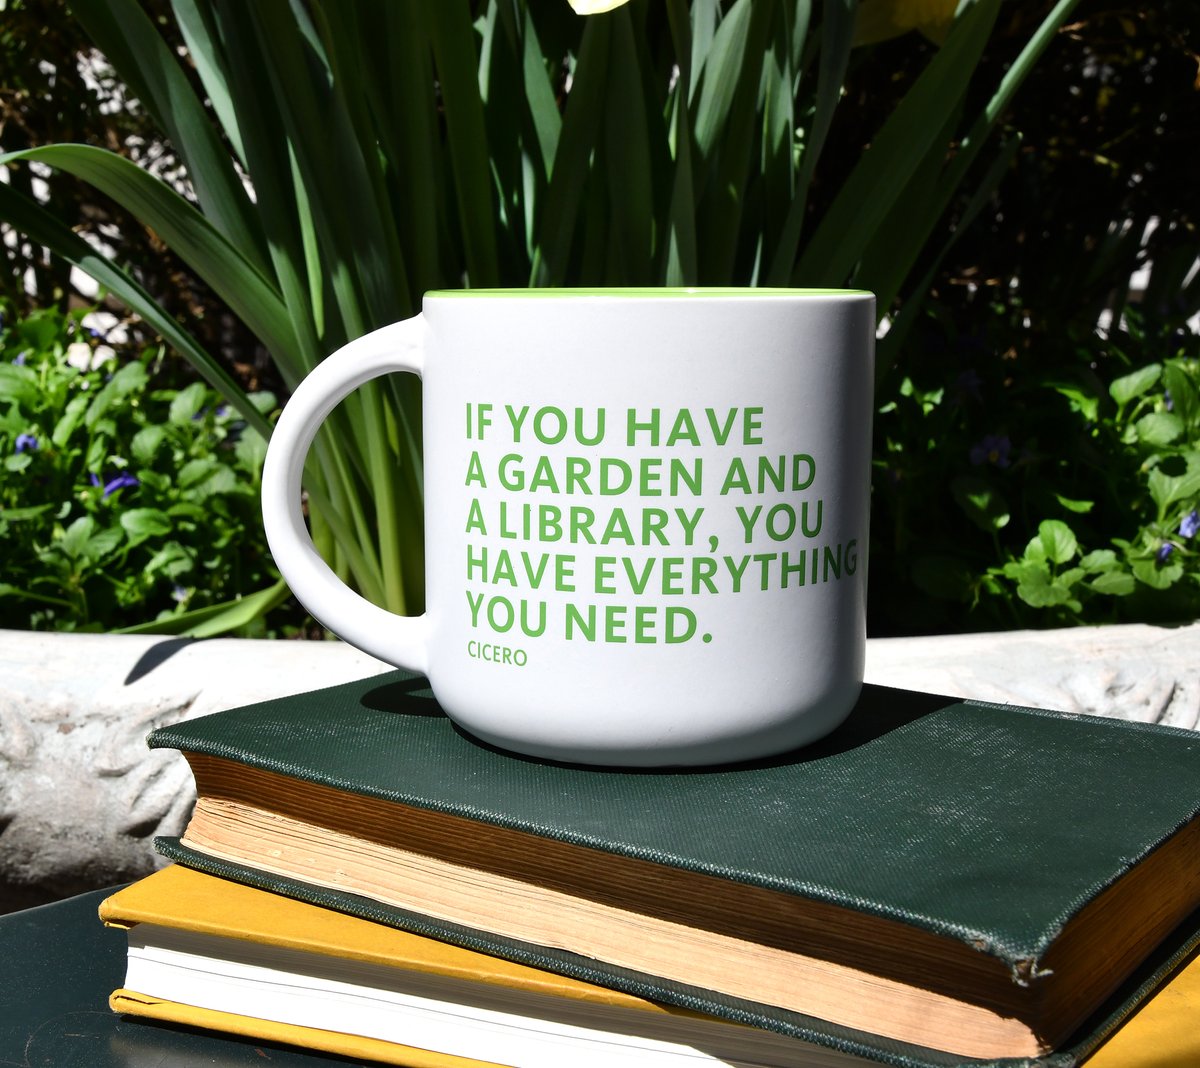 'If you have a garden and a library, you have everything you need.' – Cicero 

You might need this mug, too...Available at @nyplshop! on.nypl.org/4dfem9r